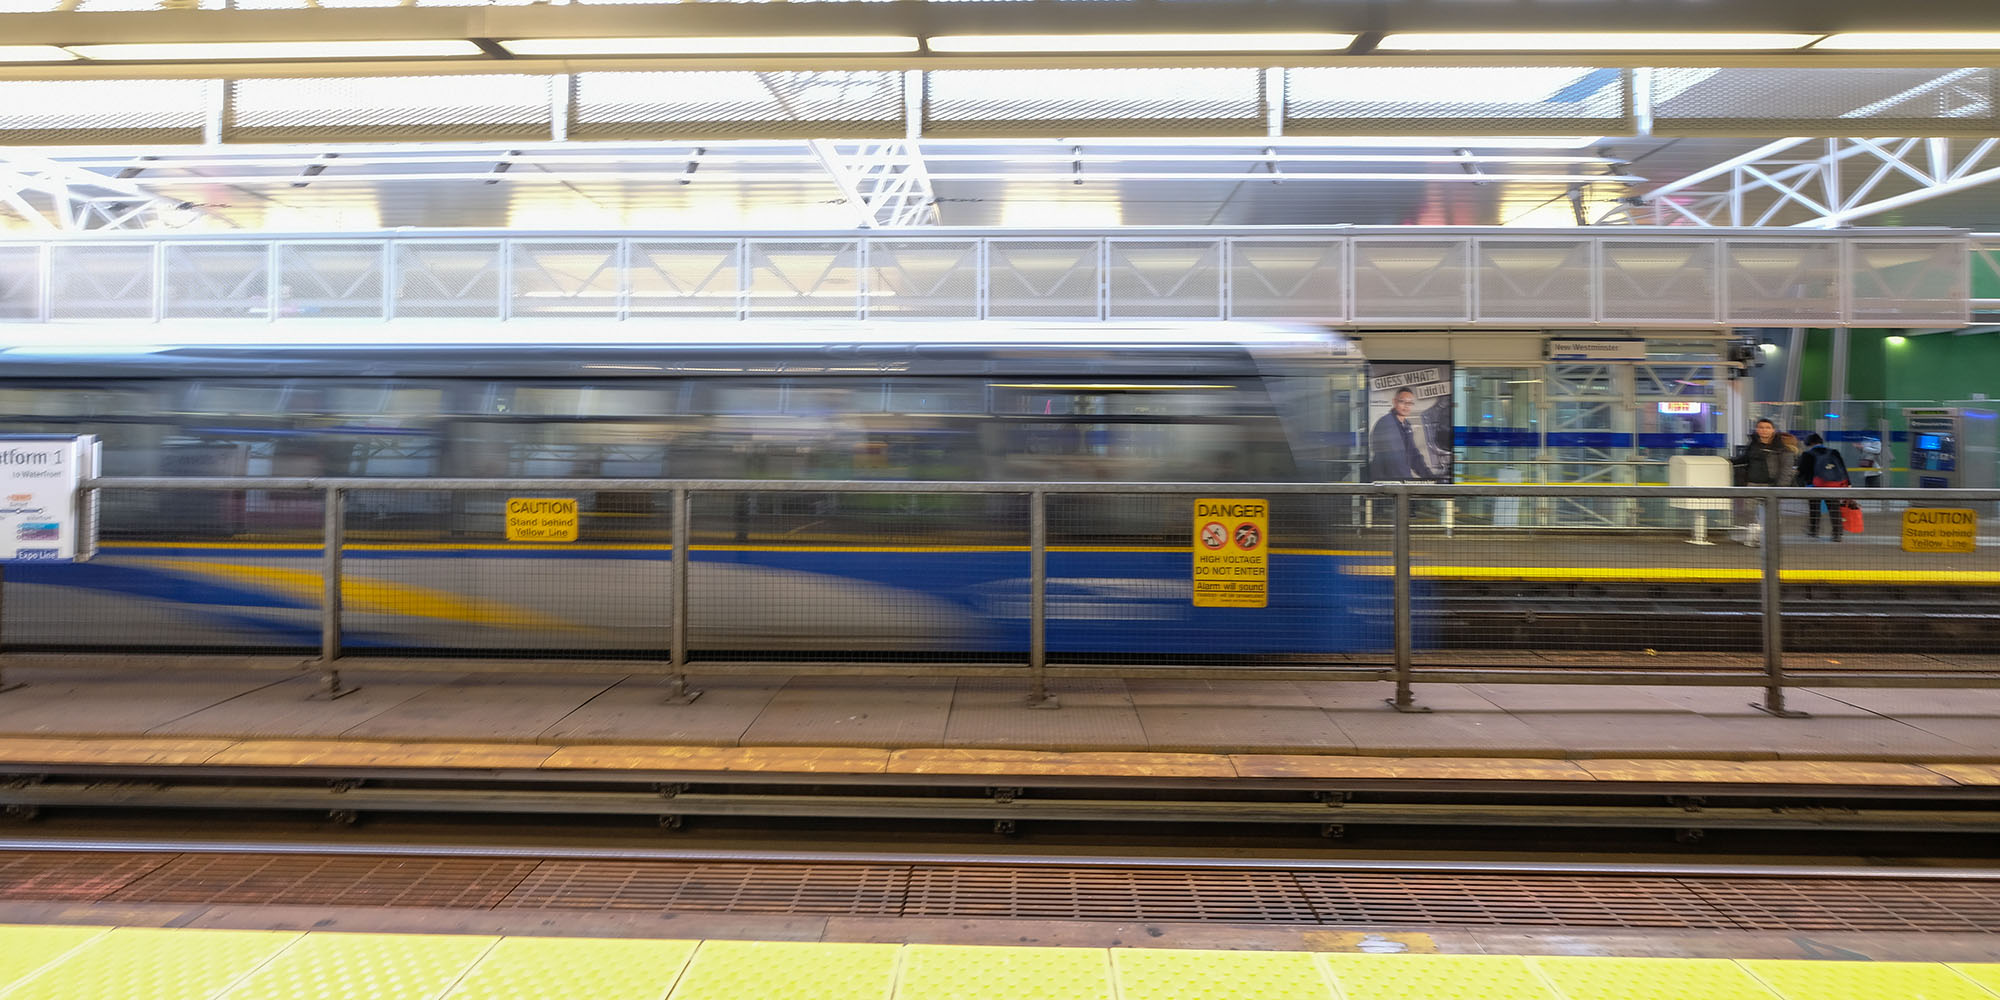 The SkyTrain departing the outbound platform at New Westminster Station